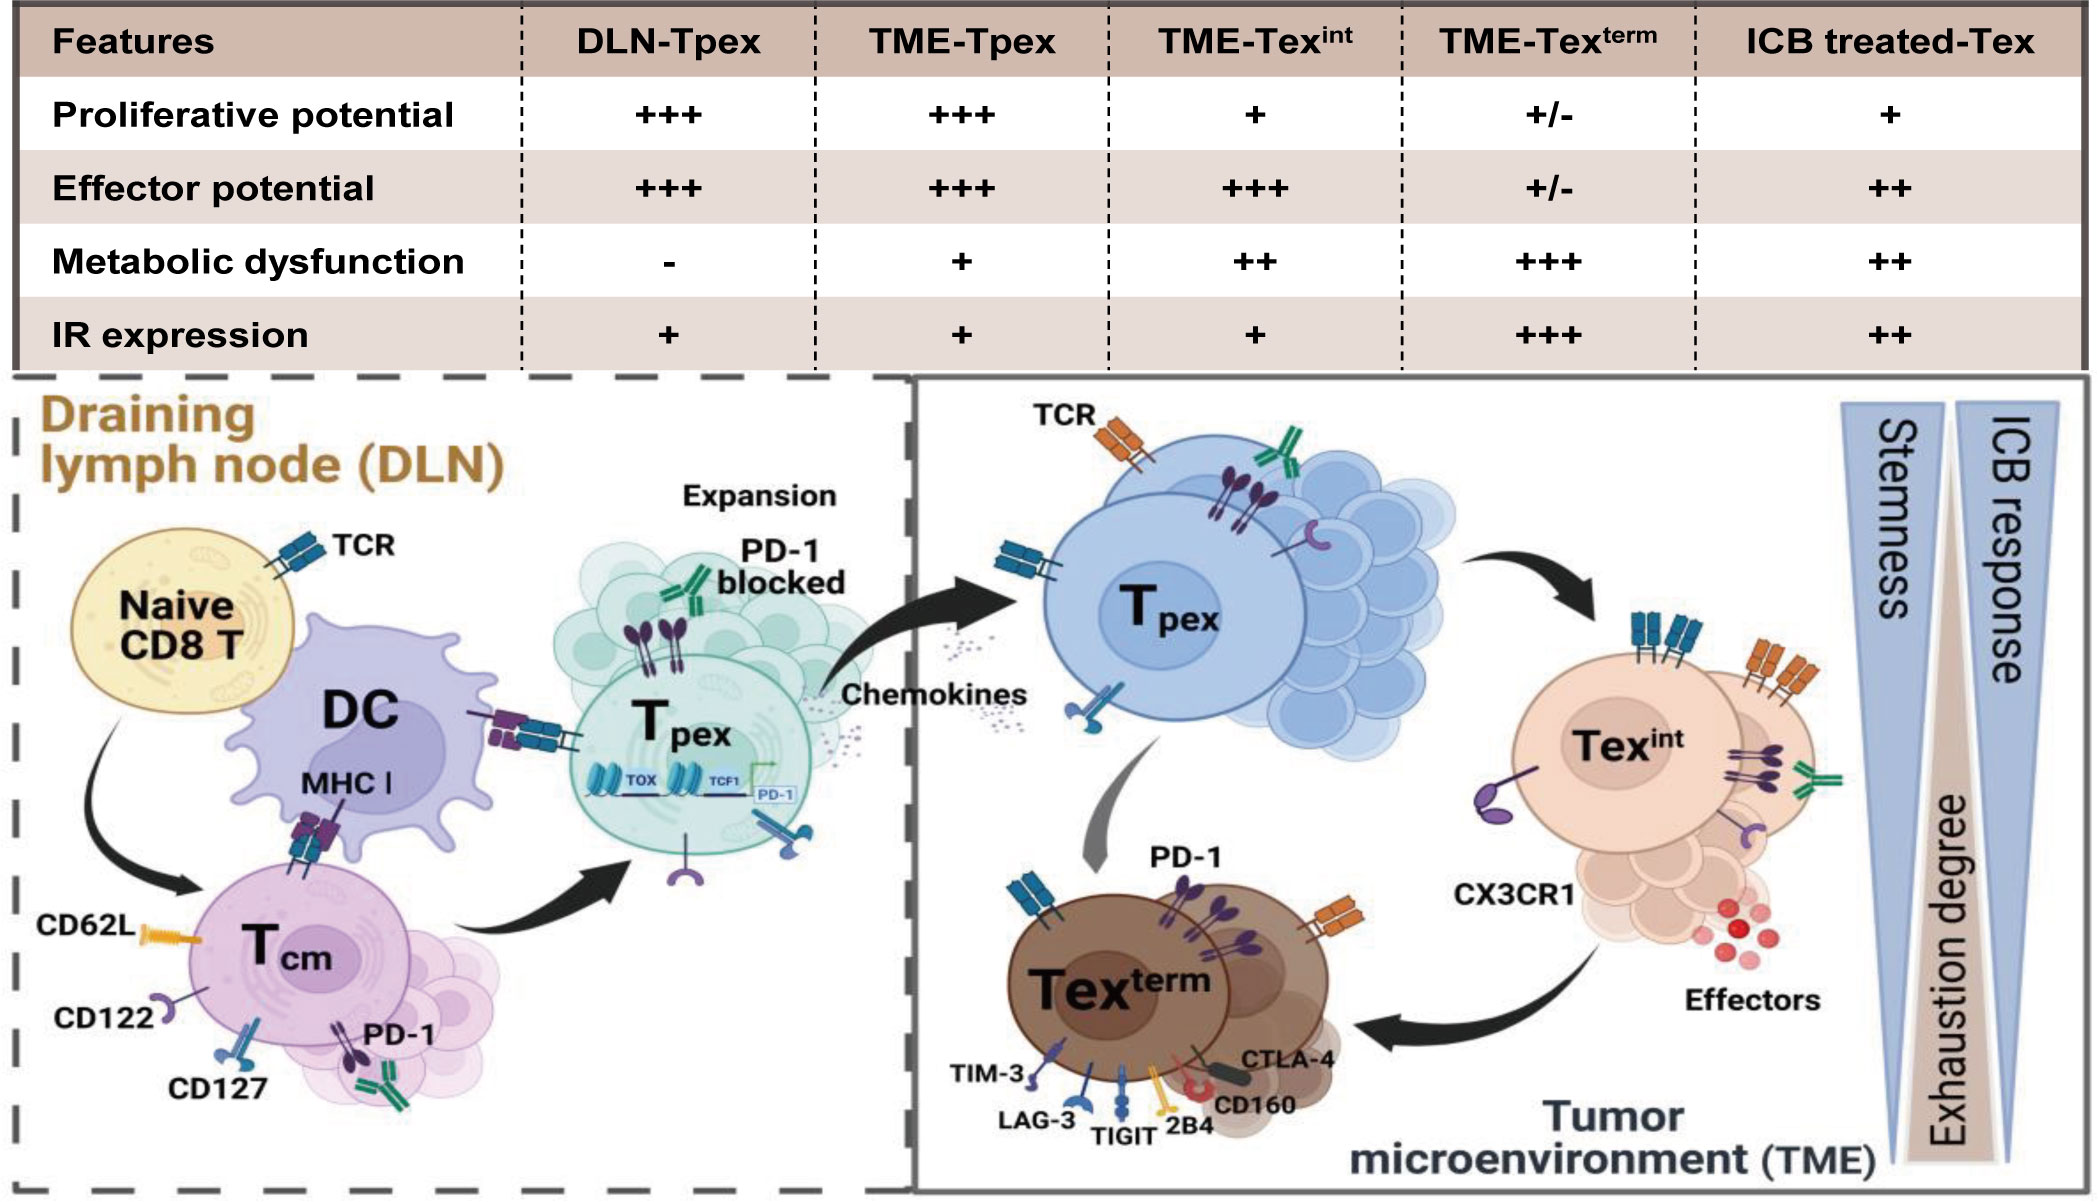 MYB orchestrates T cell exhaustion and response to checkpoint inhibition